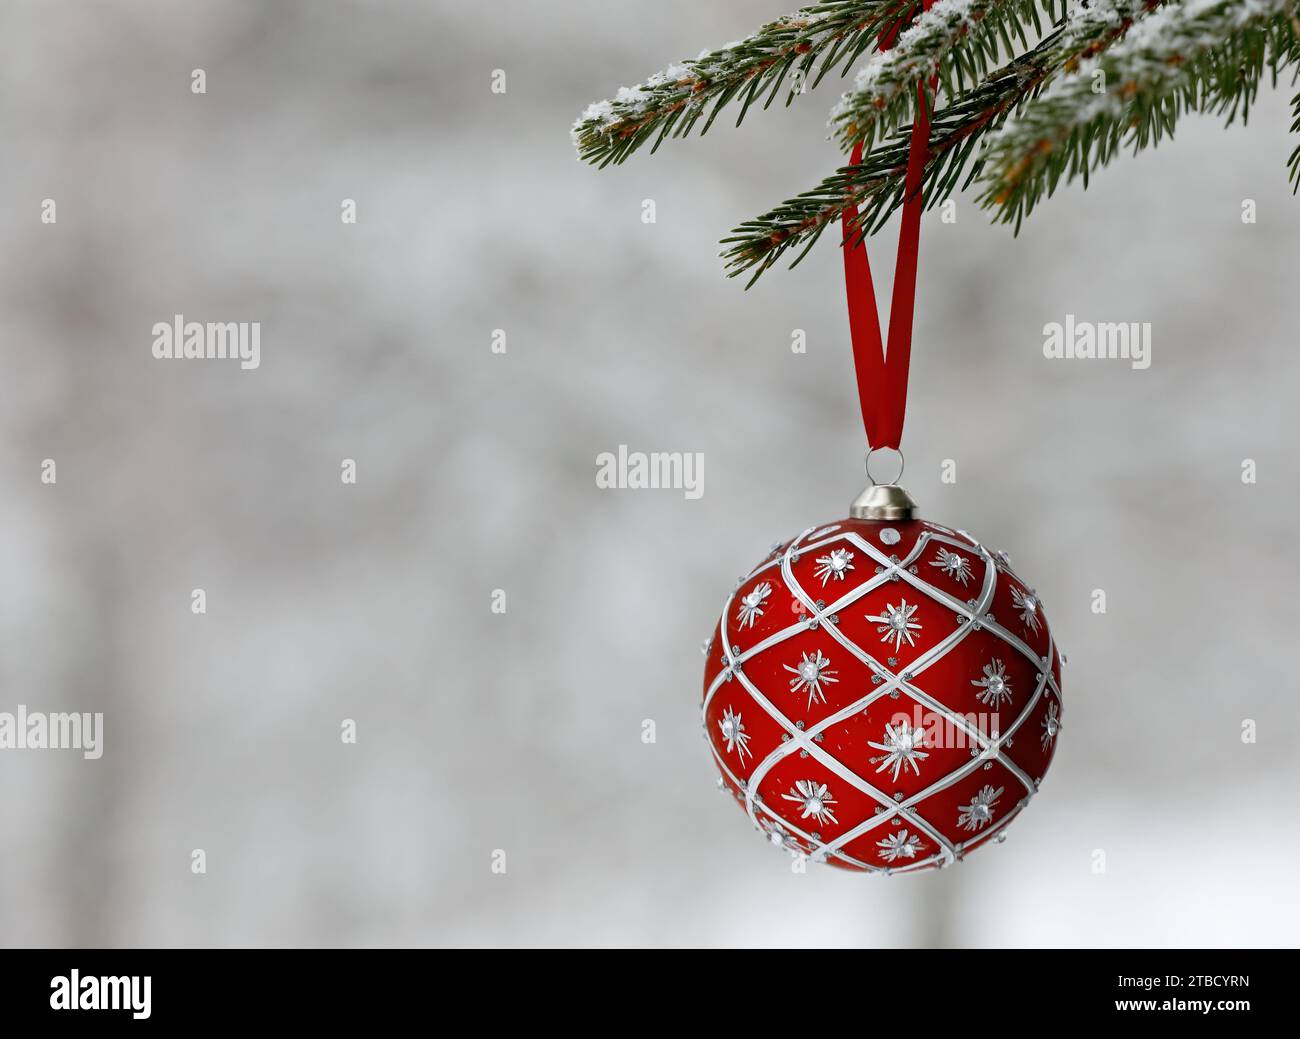 A red Christmas ball hangs on a spruce branch Stock Photo